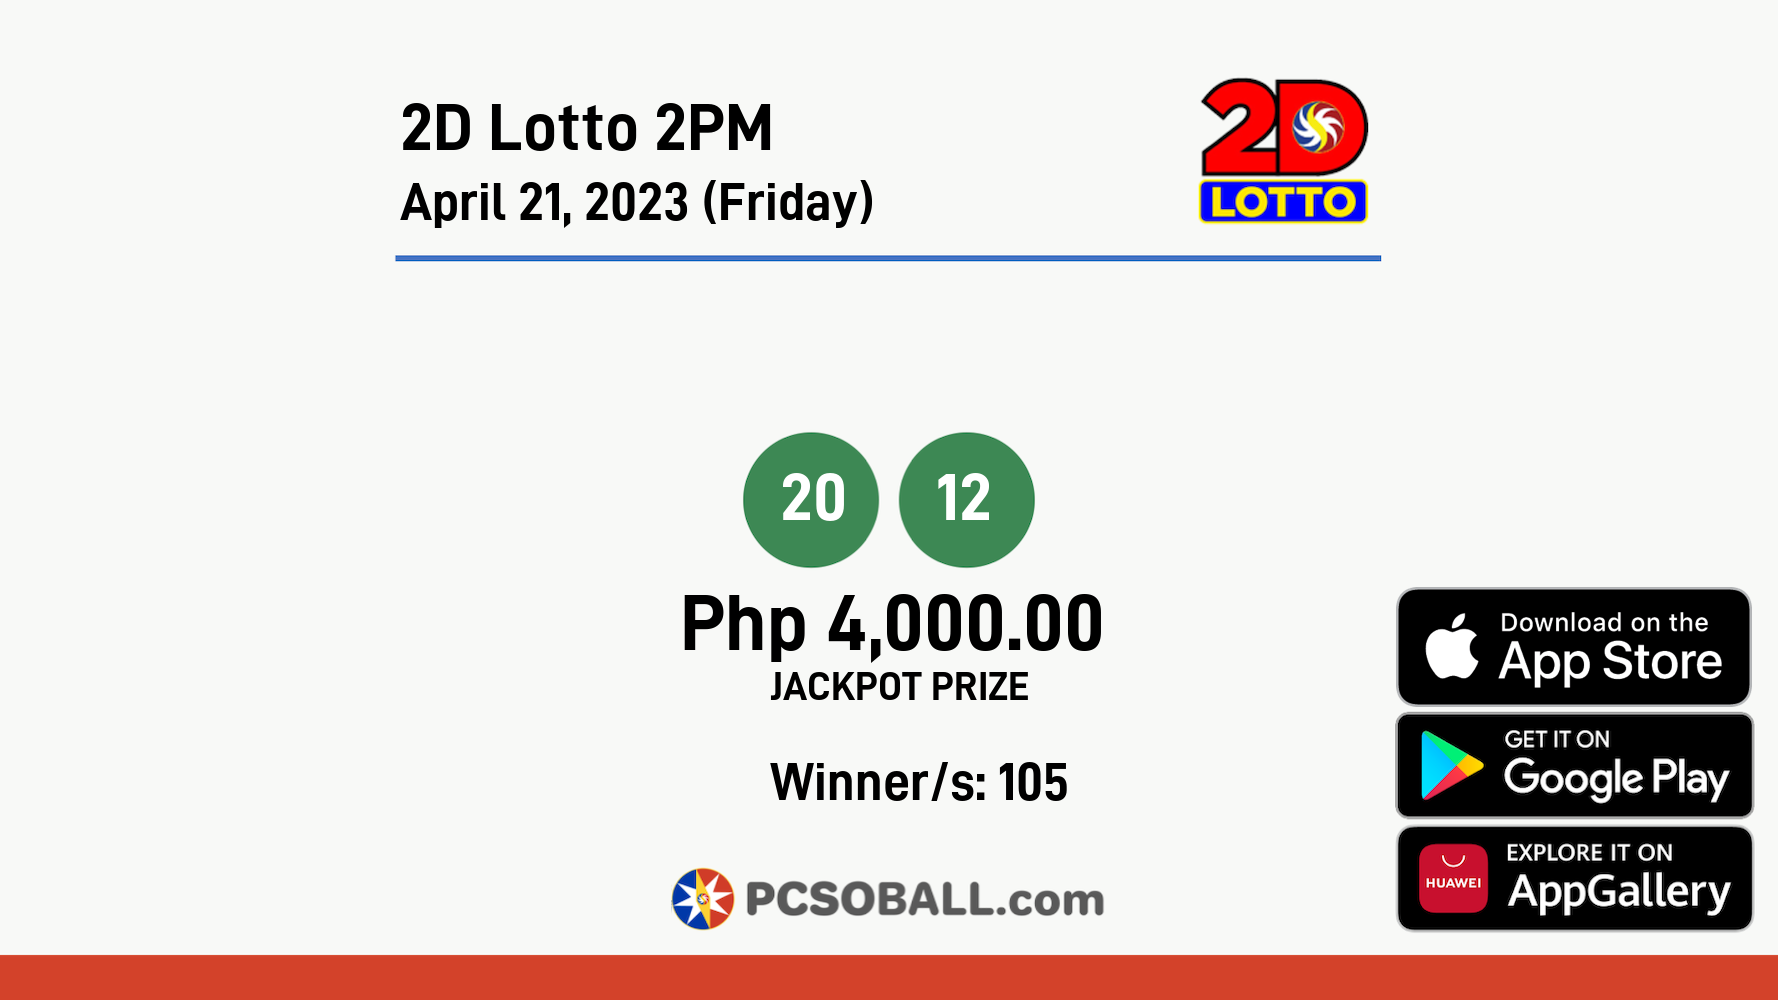 2D Lotto 2PM April 21, 2023 (Friday) Result